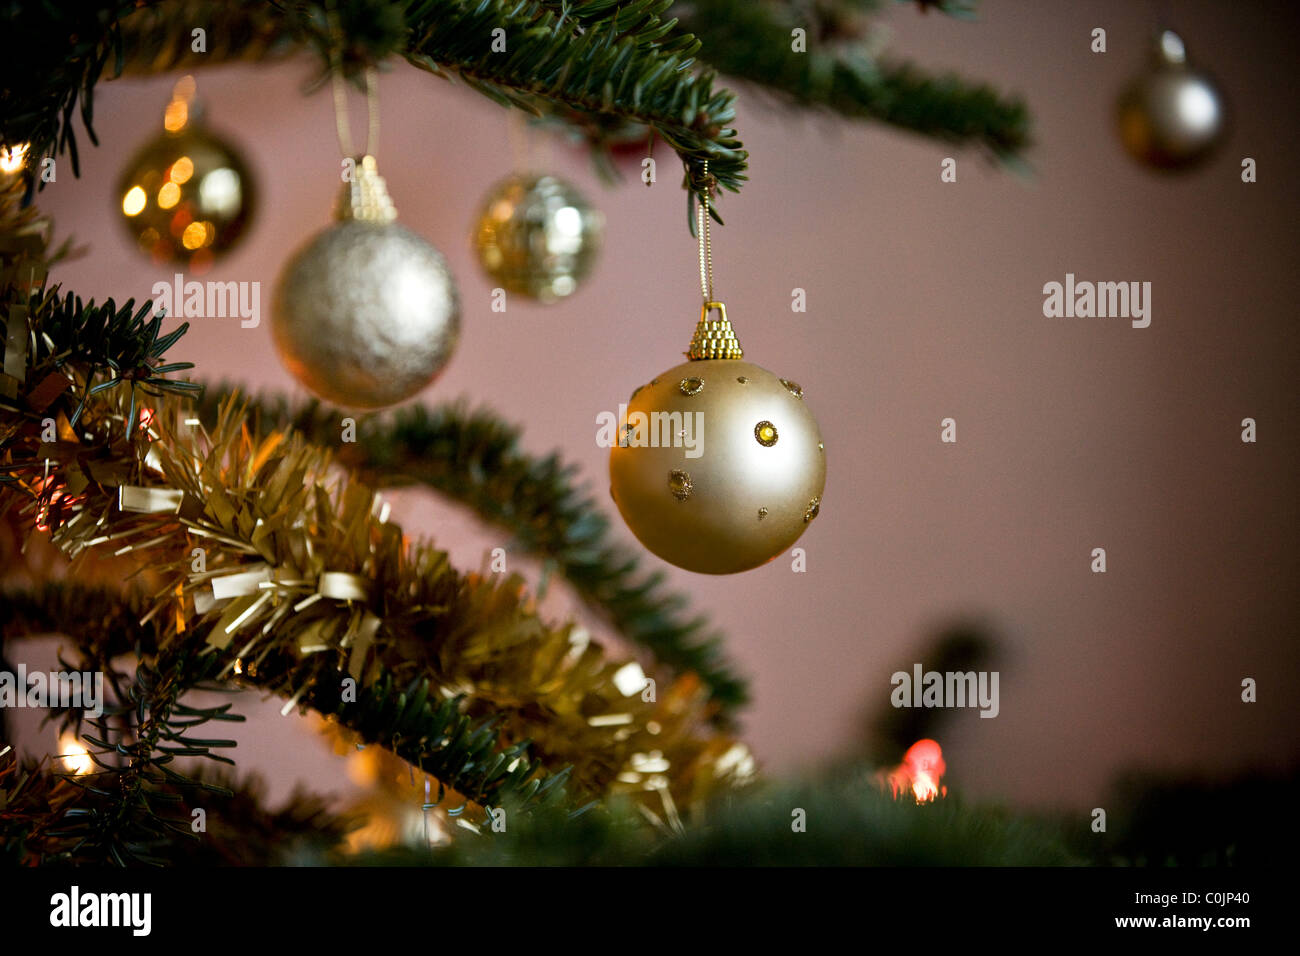 Gold baubles hanging on a Christmas tree Stock Photo